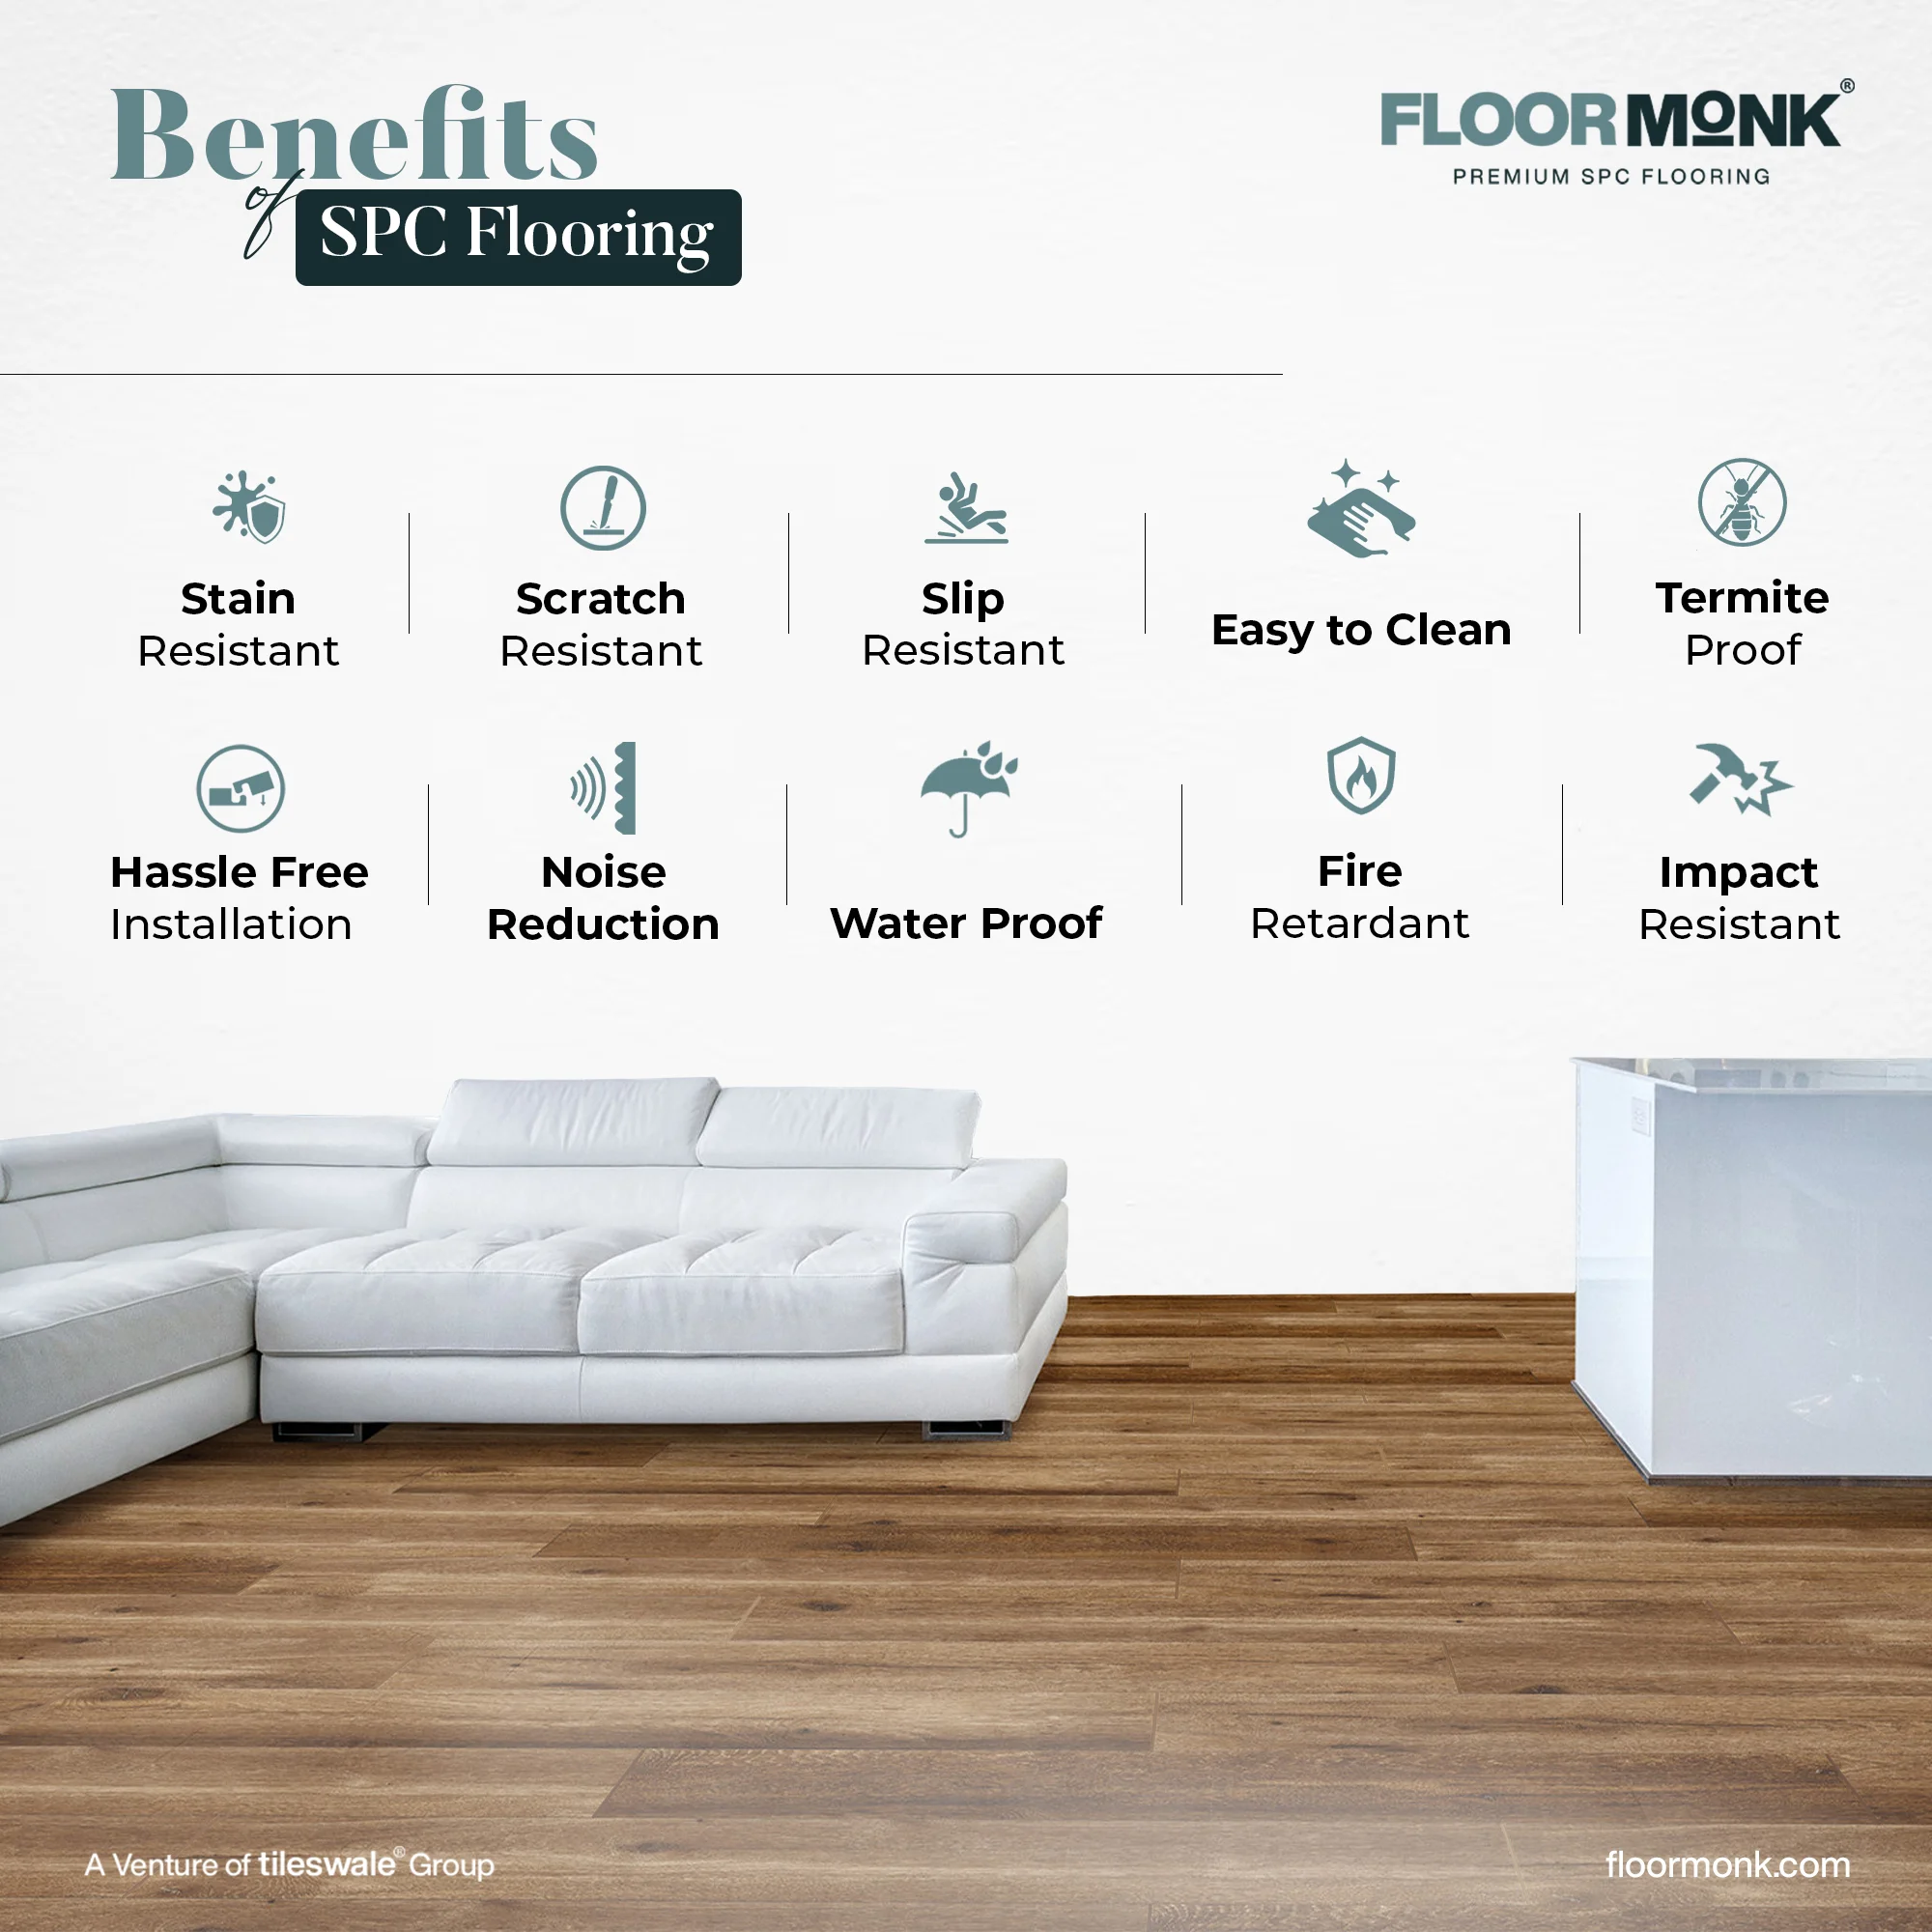 Soundproof SPC Flooring: Their Many Benefits